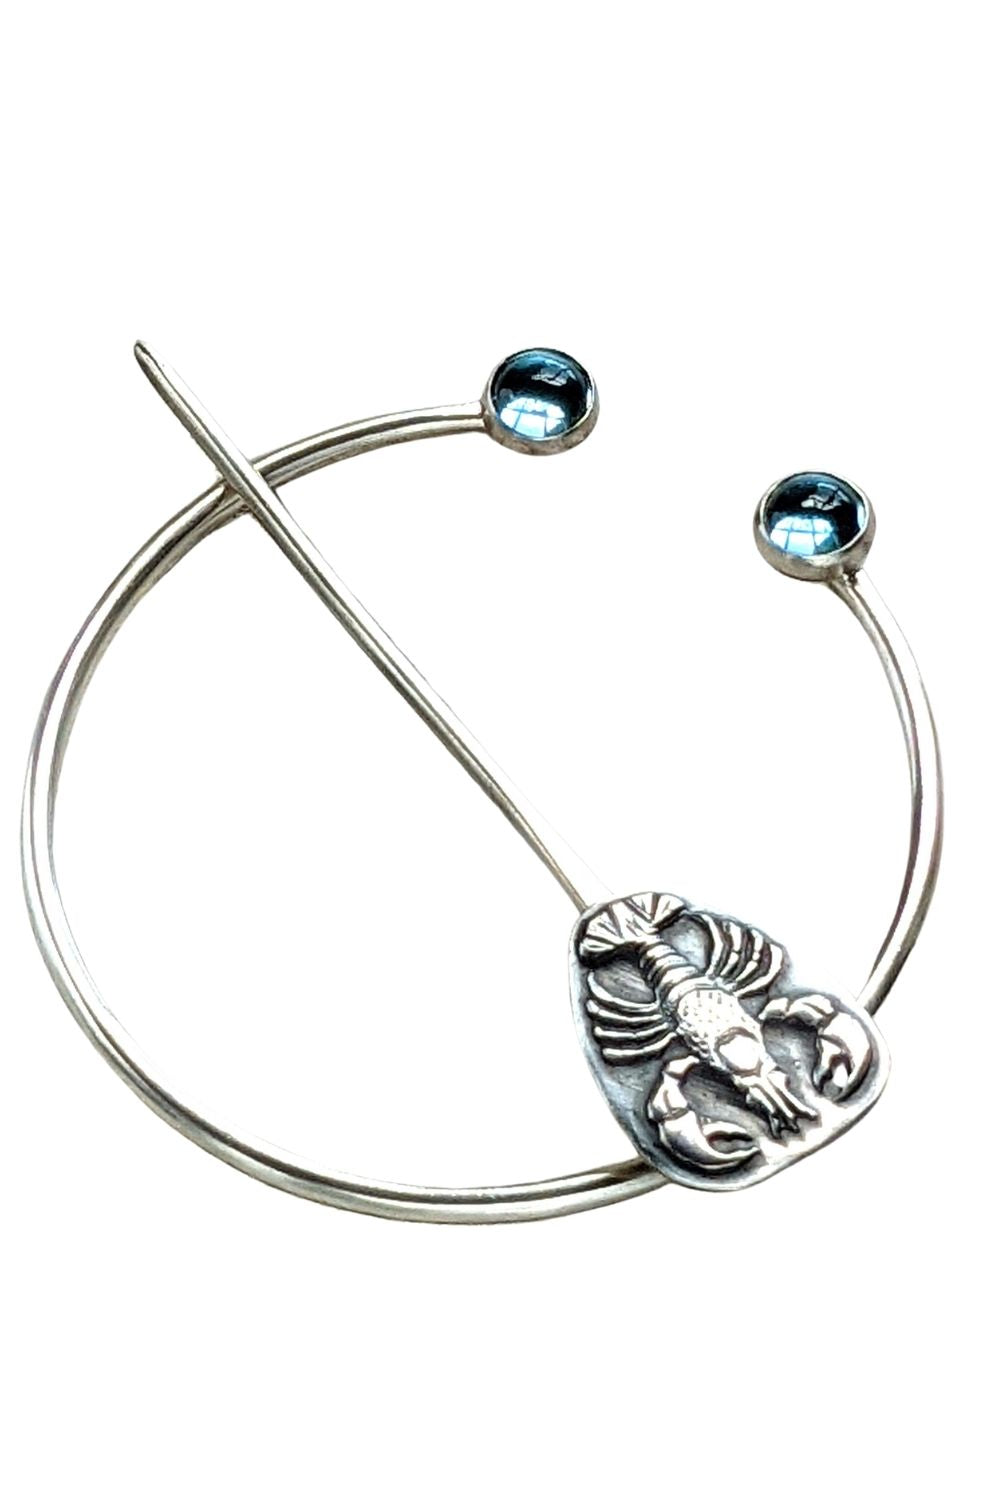 Sterling silver penannular brooch. The tip of the stem is decorated with a detailed dimensional lobster, and the ends of the loop have bright swiss blue topaz gemstone cabochons.